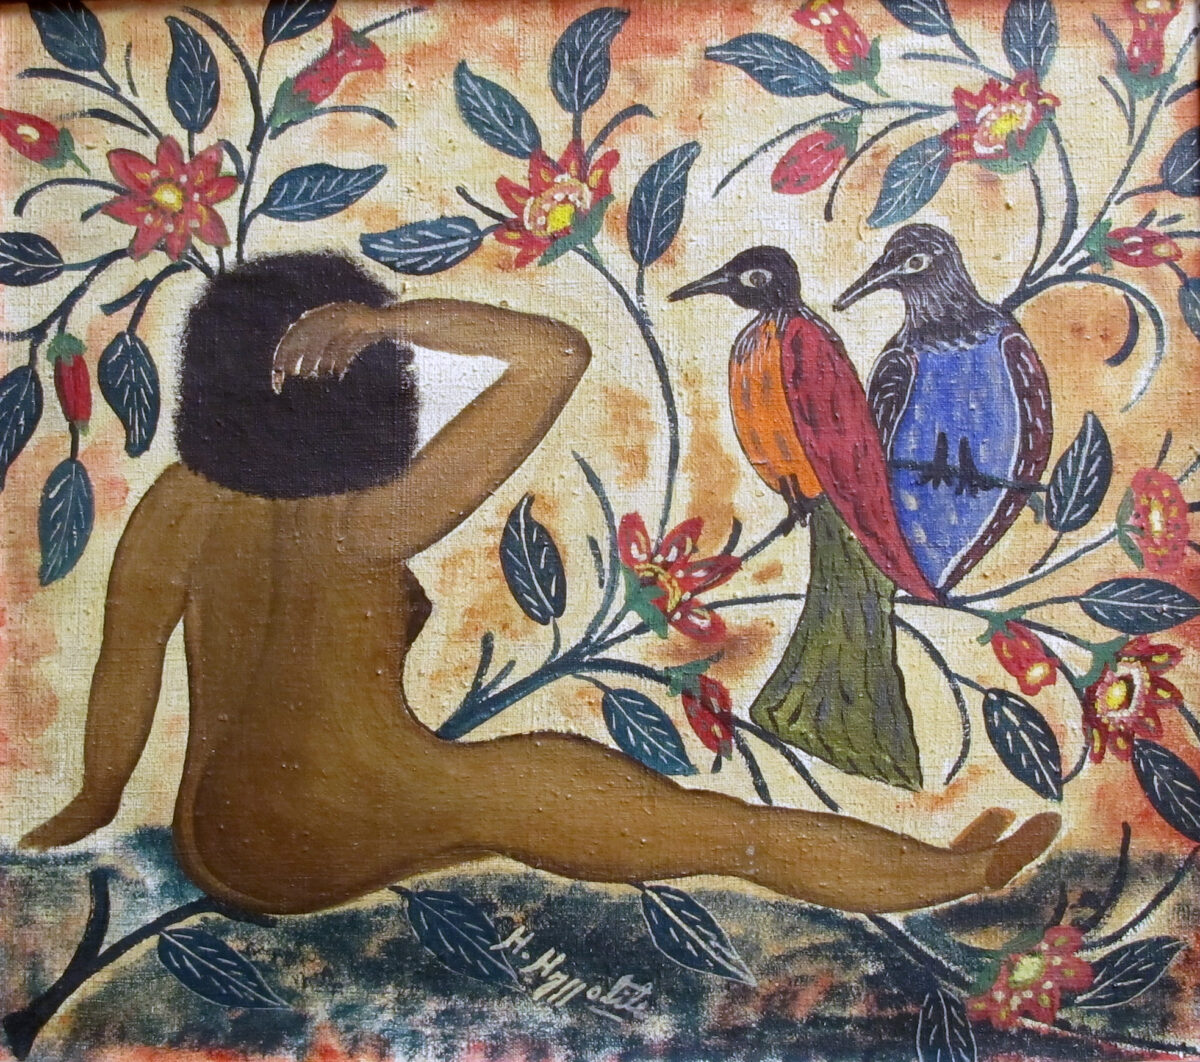 MOCA’S ‘LIFE AND SPIRITUALITY IN HAITIAN ART’ EXHIBIT: SIMPLE MATERIALS, EXCEPTIONAL VISION